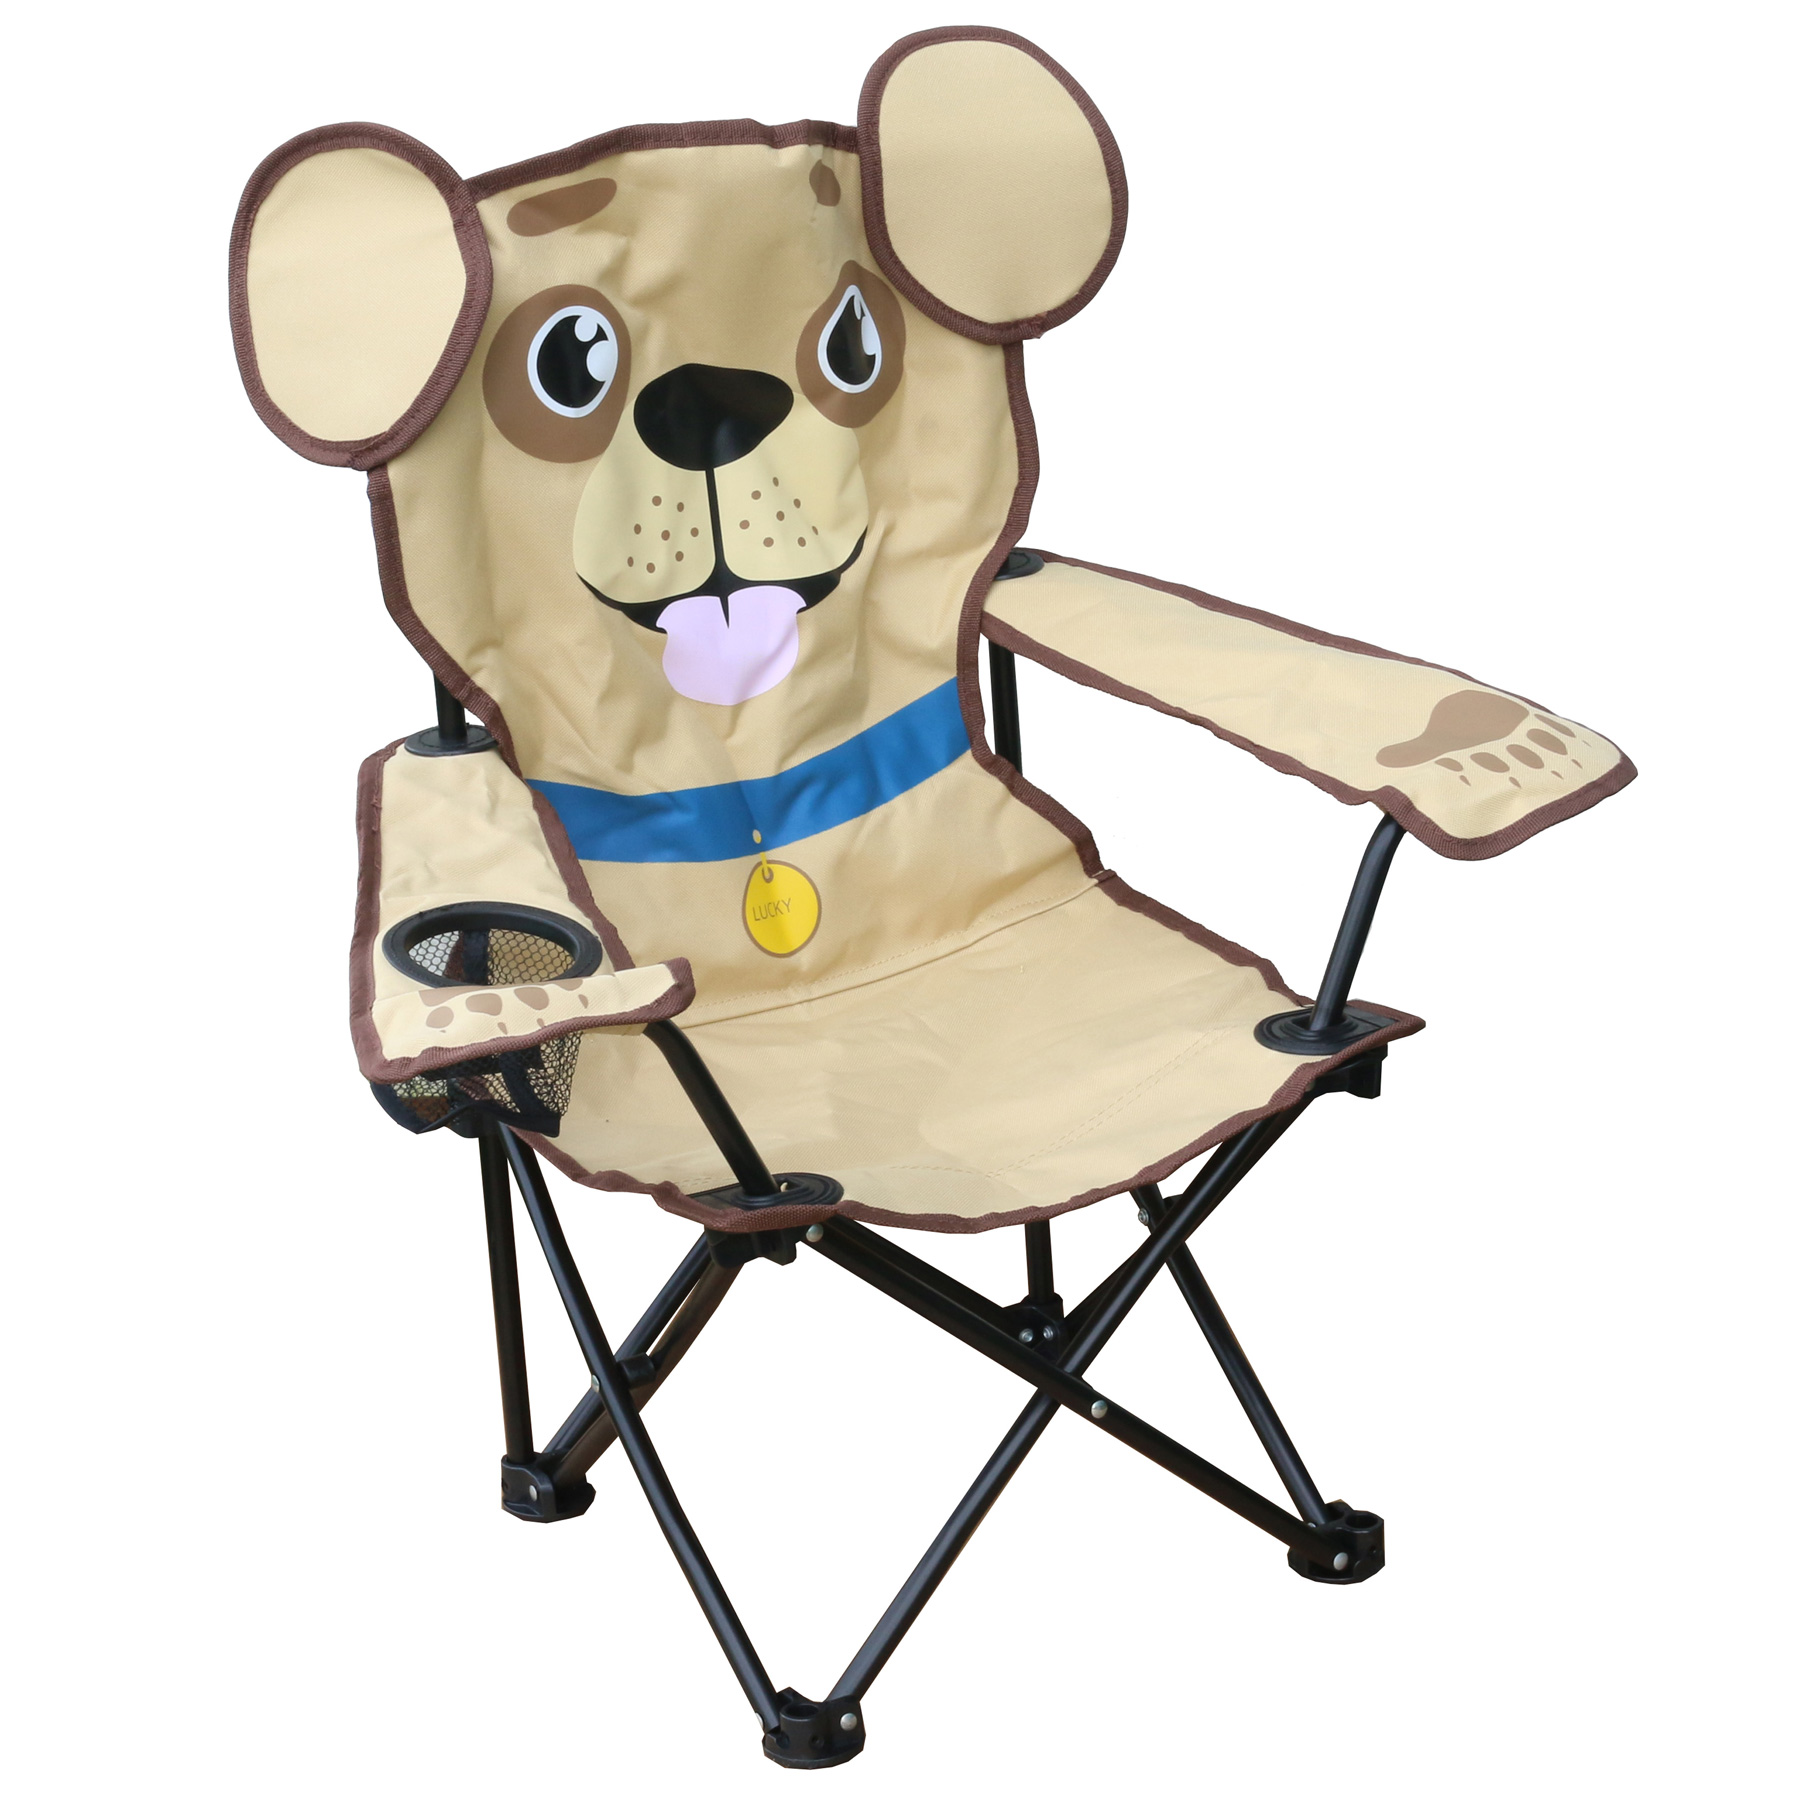 KIDS CHAIR LUCKY PUP SHAPED